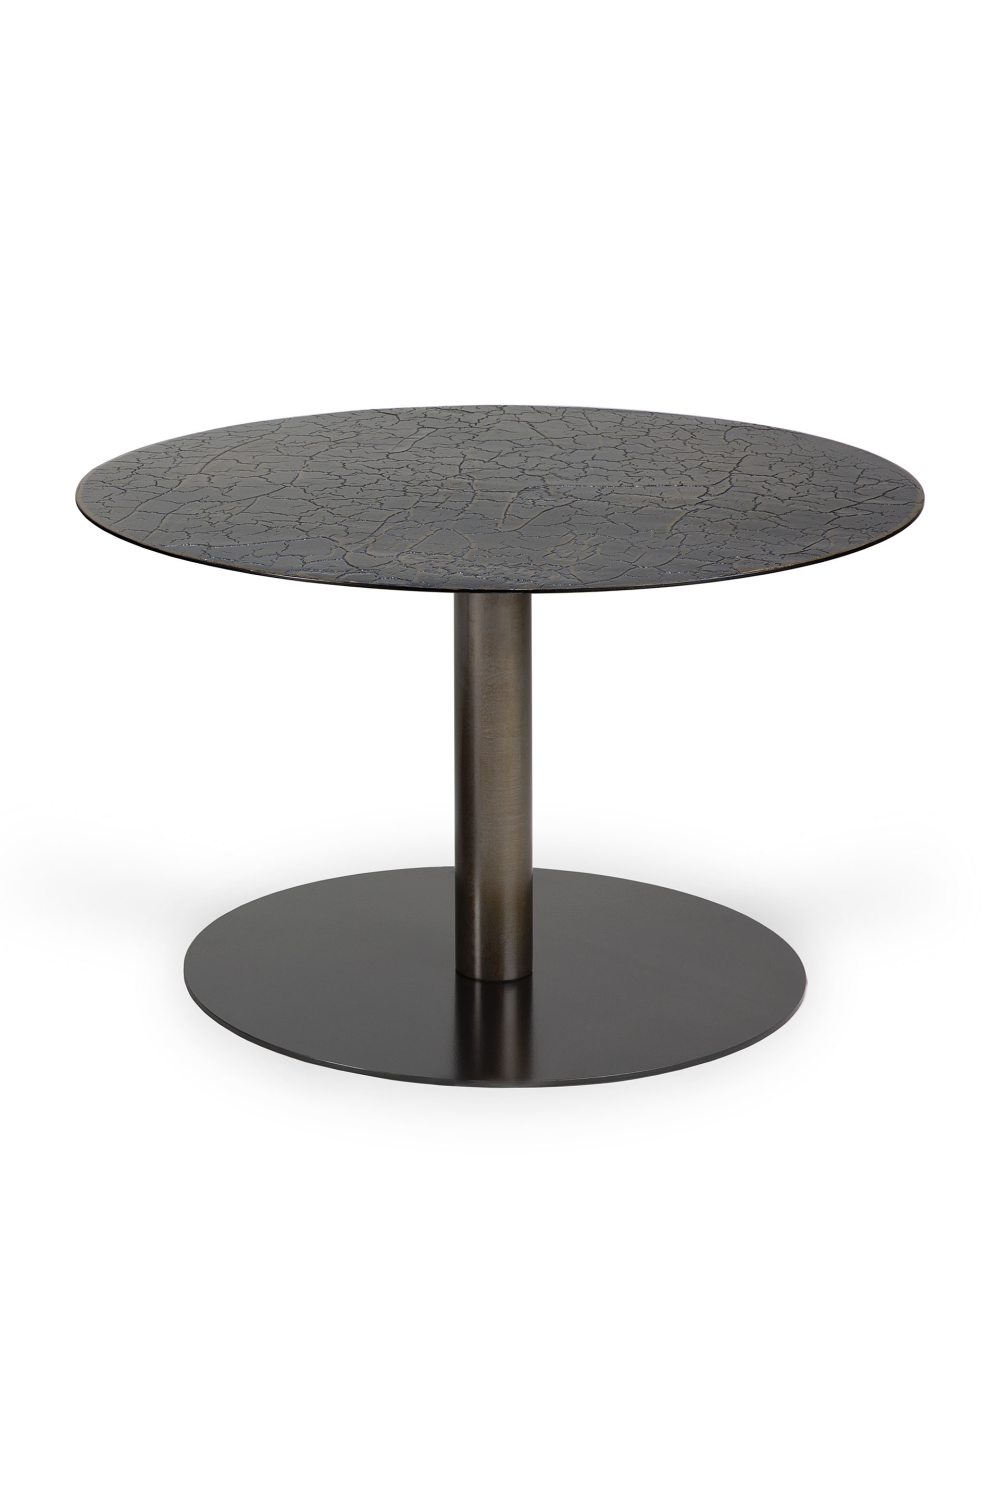 Mineral Round Pedestal Coffee Table | Ethnicraft Sphere | Oroa.com